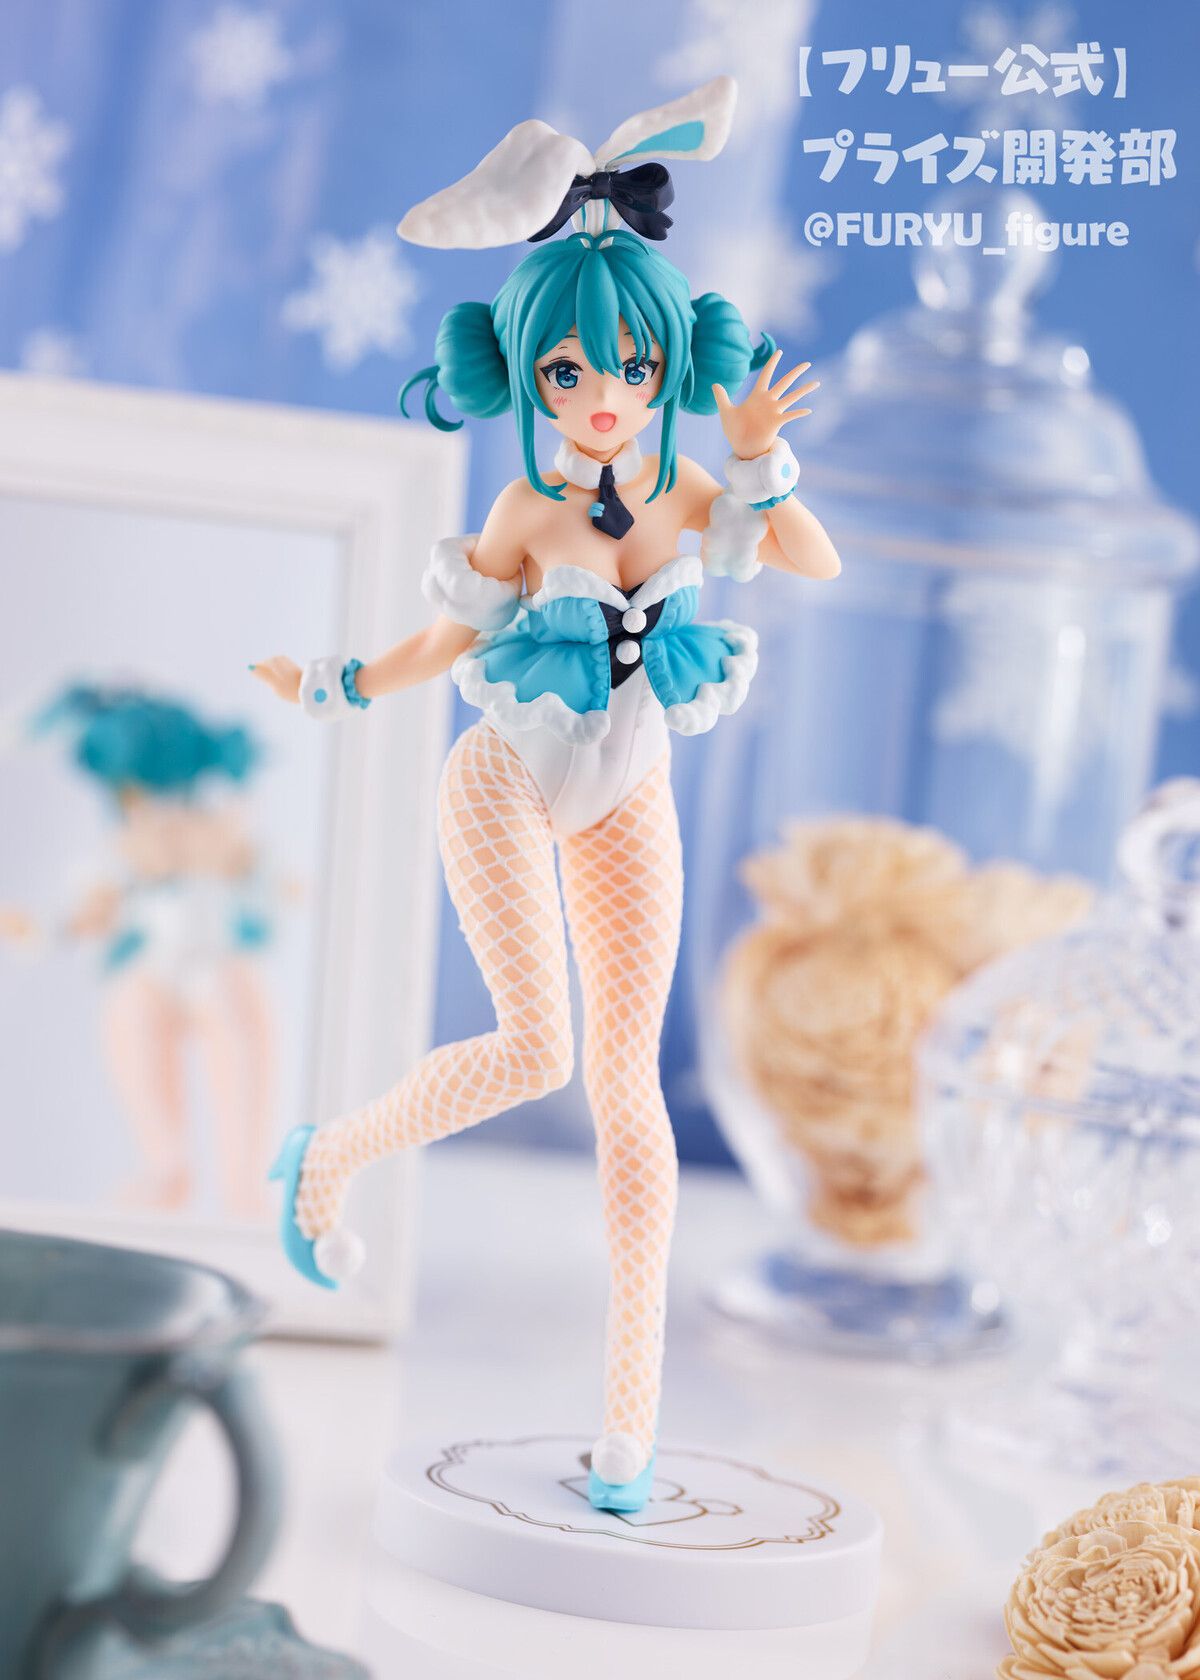 [Hatsune Miku] Erotic figure of the bunny figure of the and thighs of the muchimuchi drawn by Anmi teacher! 2